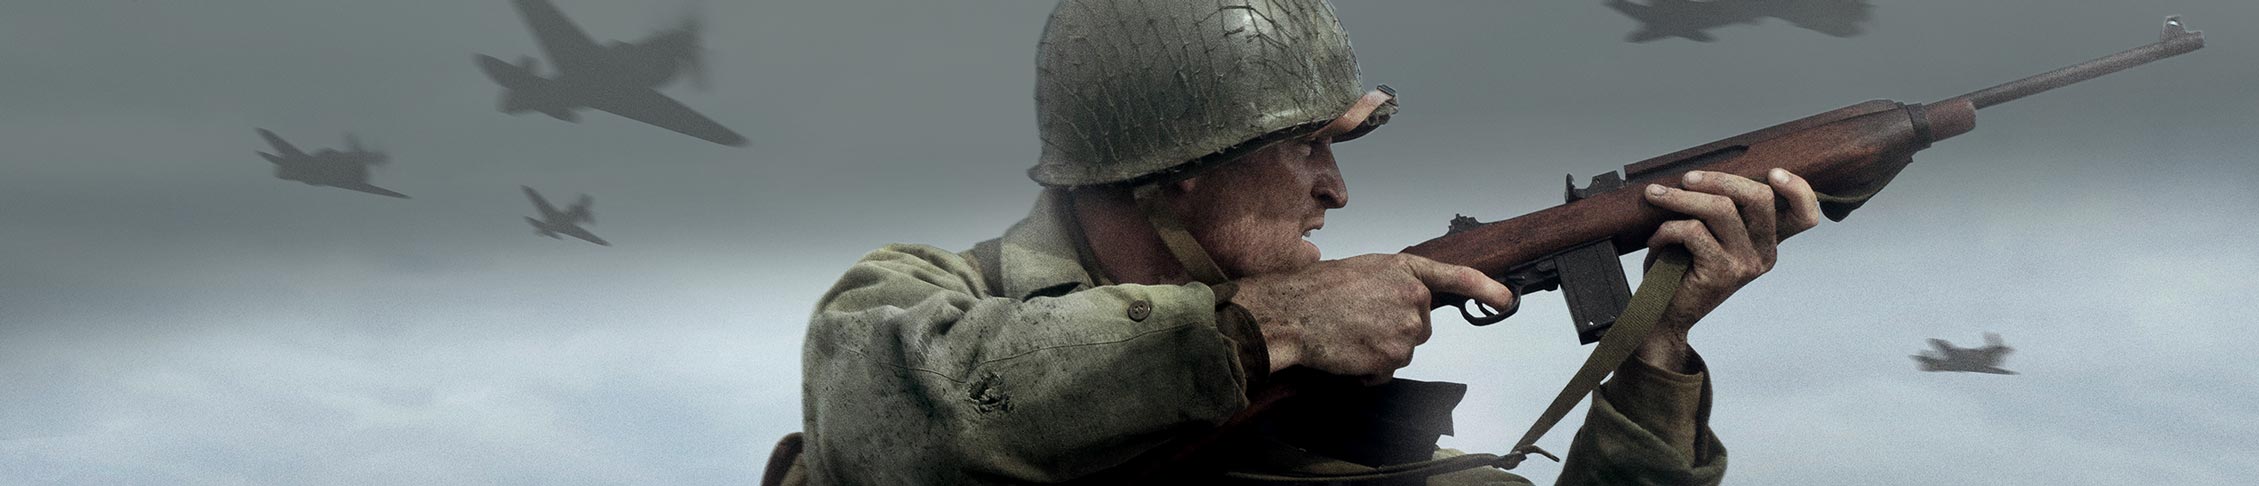 12 Common Call of Duty: WWII Problems & How to Fix Them